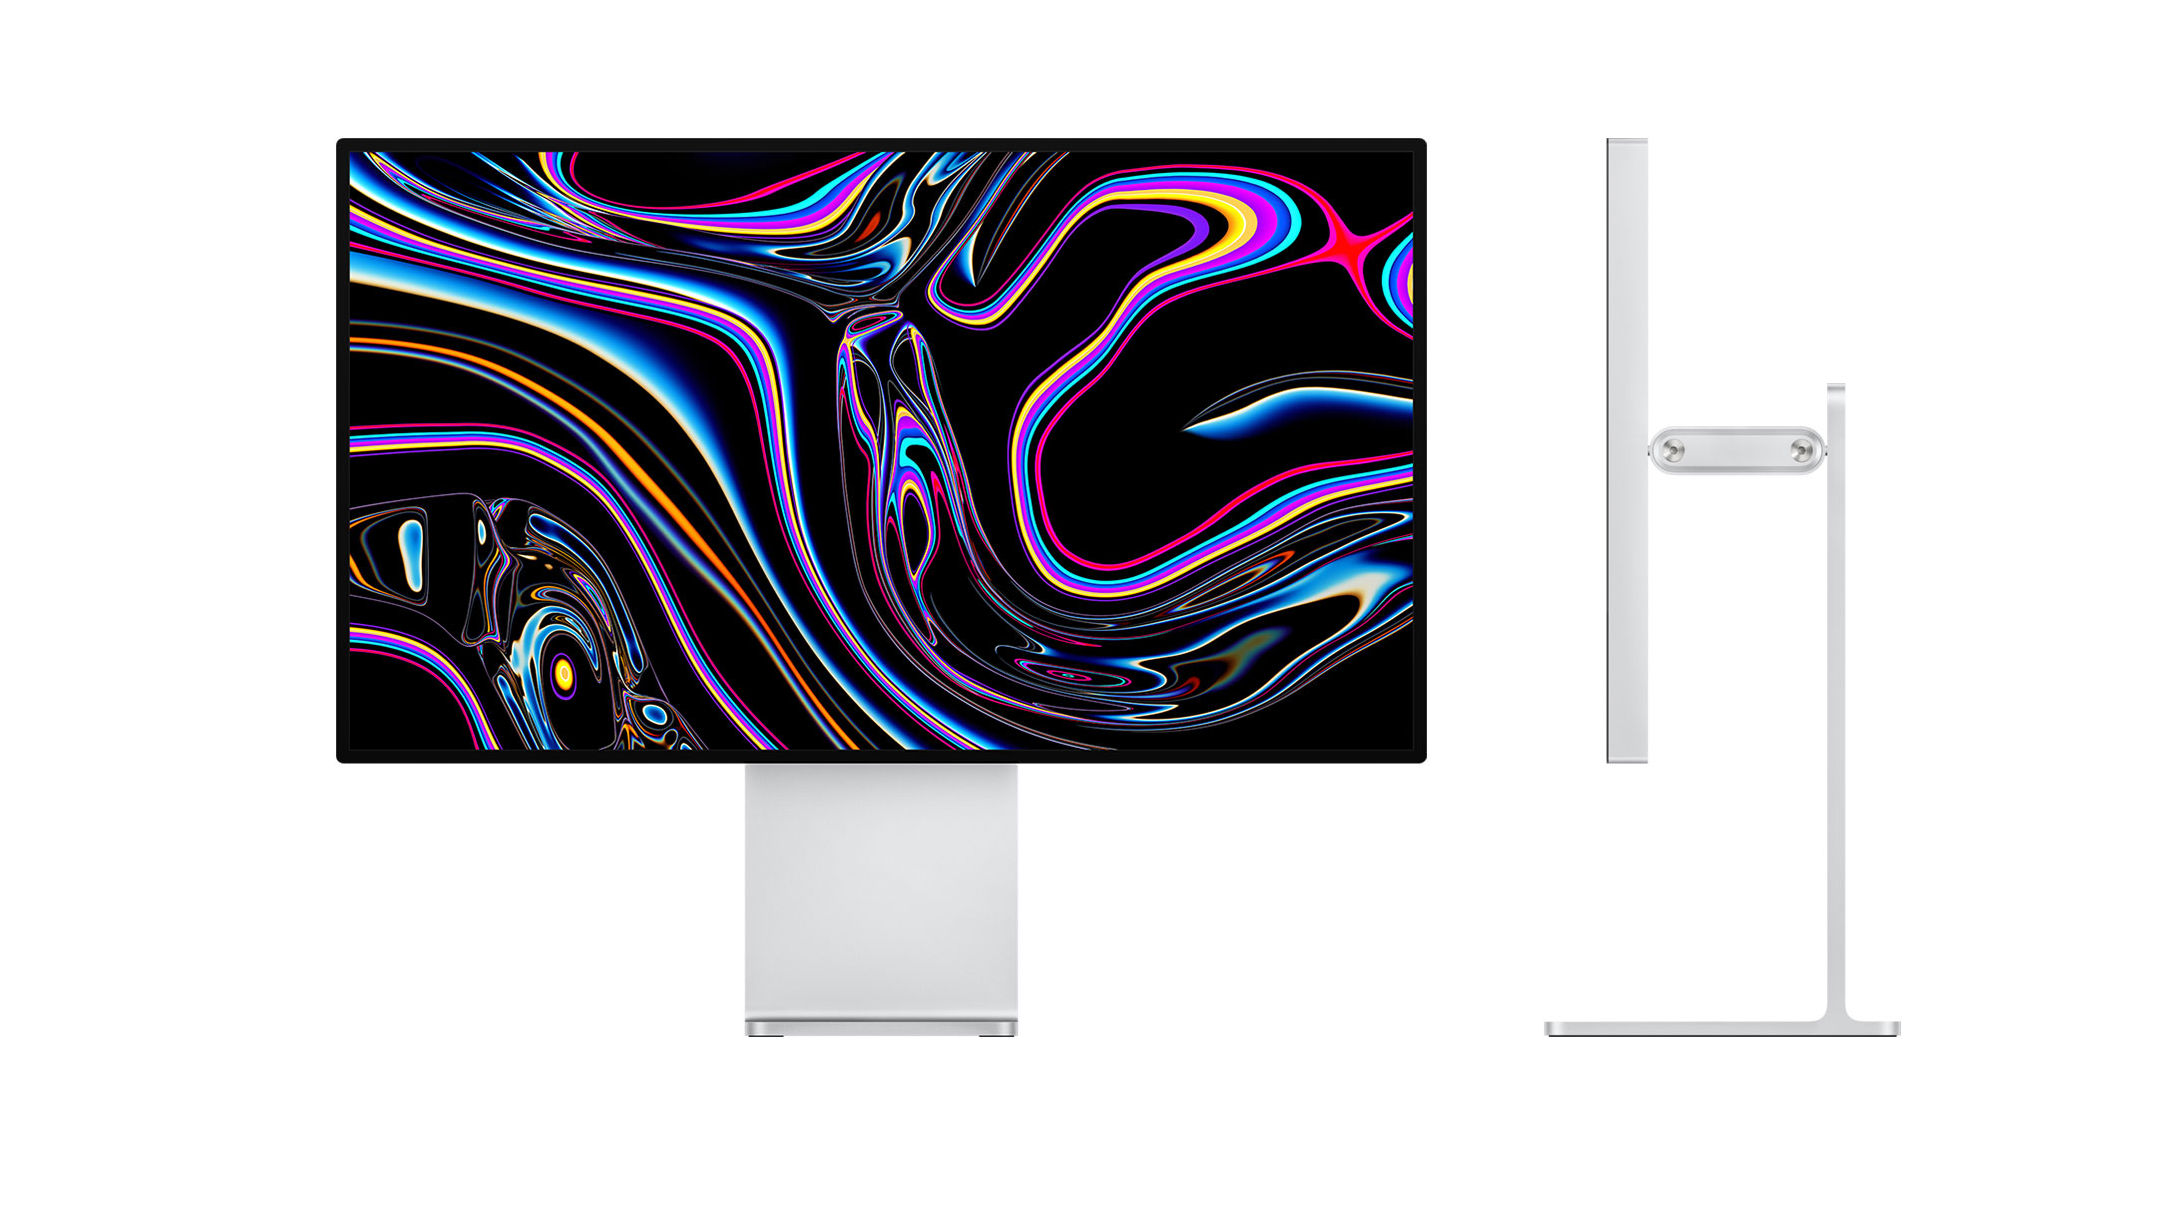 All I want is for Apple to make a monitor that costs less than $US5,000 ($6,460). Is that too much to ask? (Image: Apple)